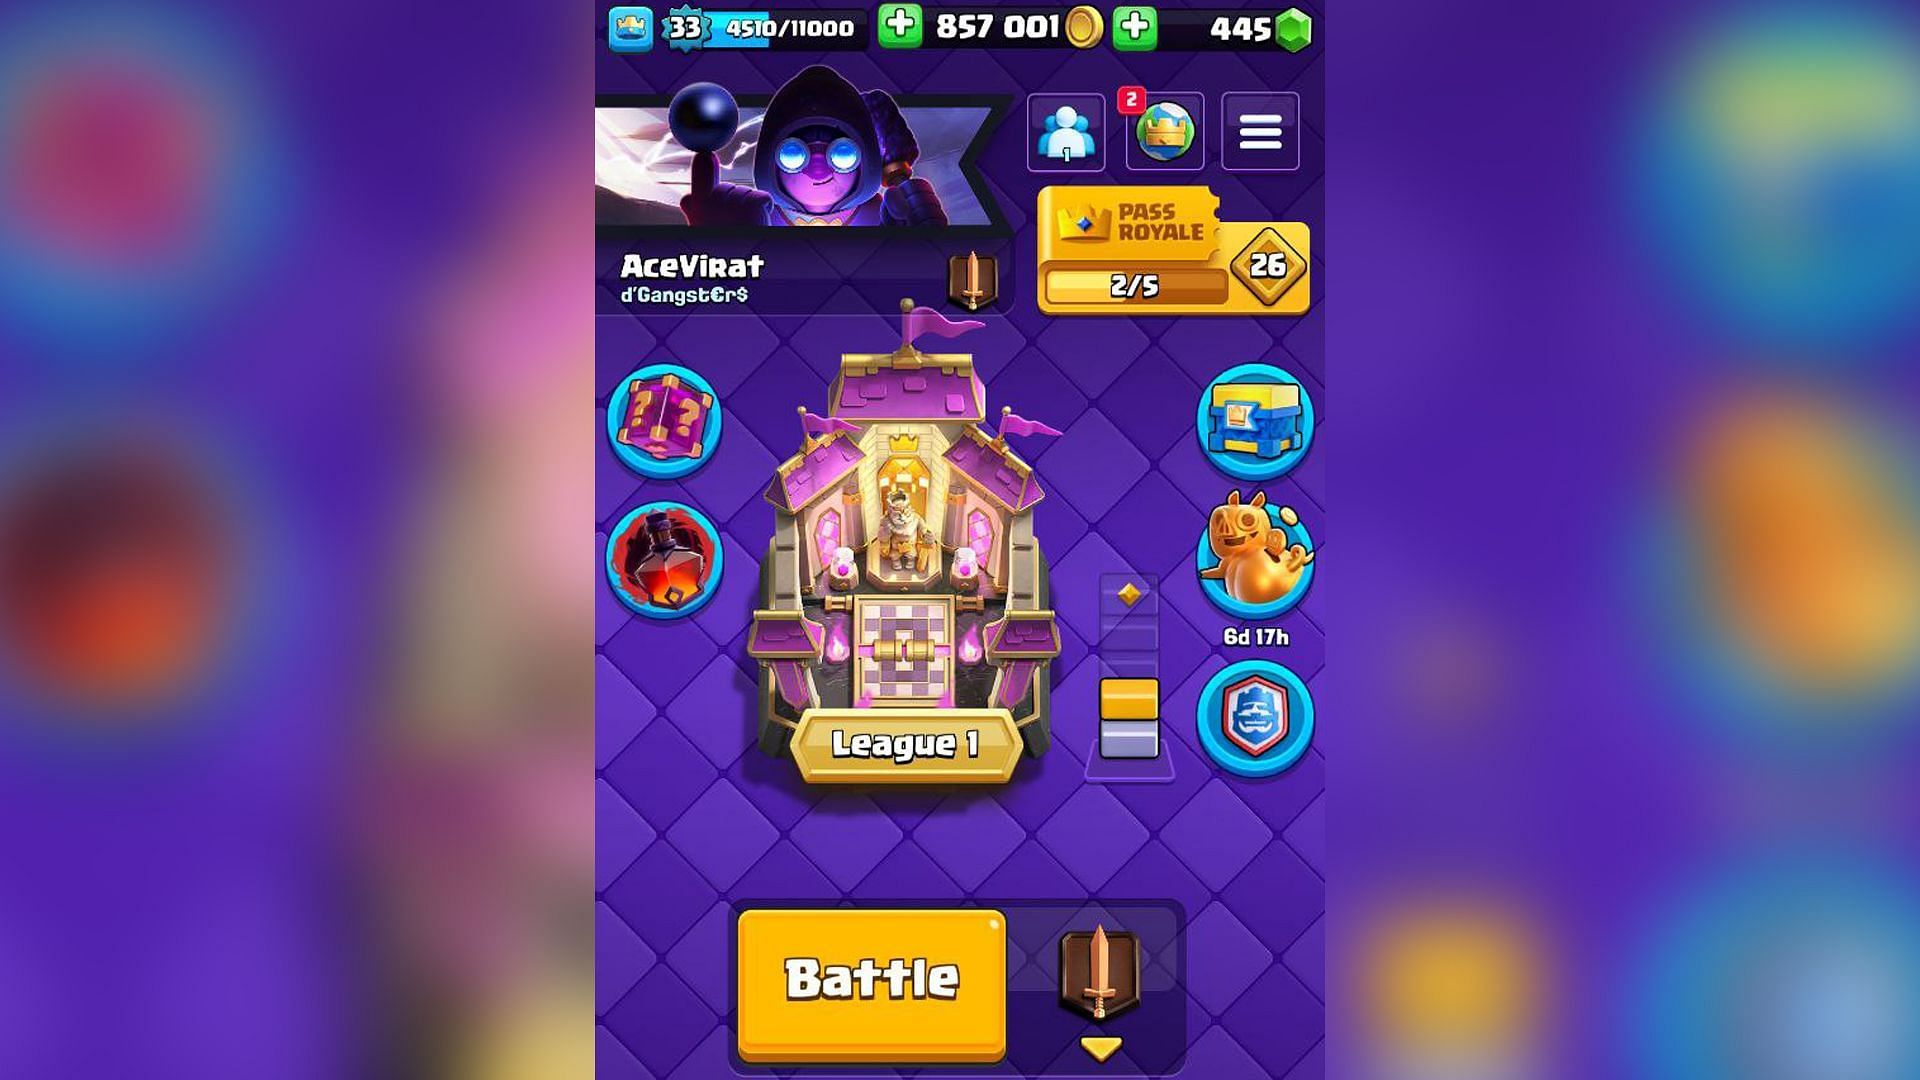 Open your CR profile (Image via Supercell)